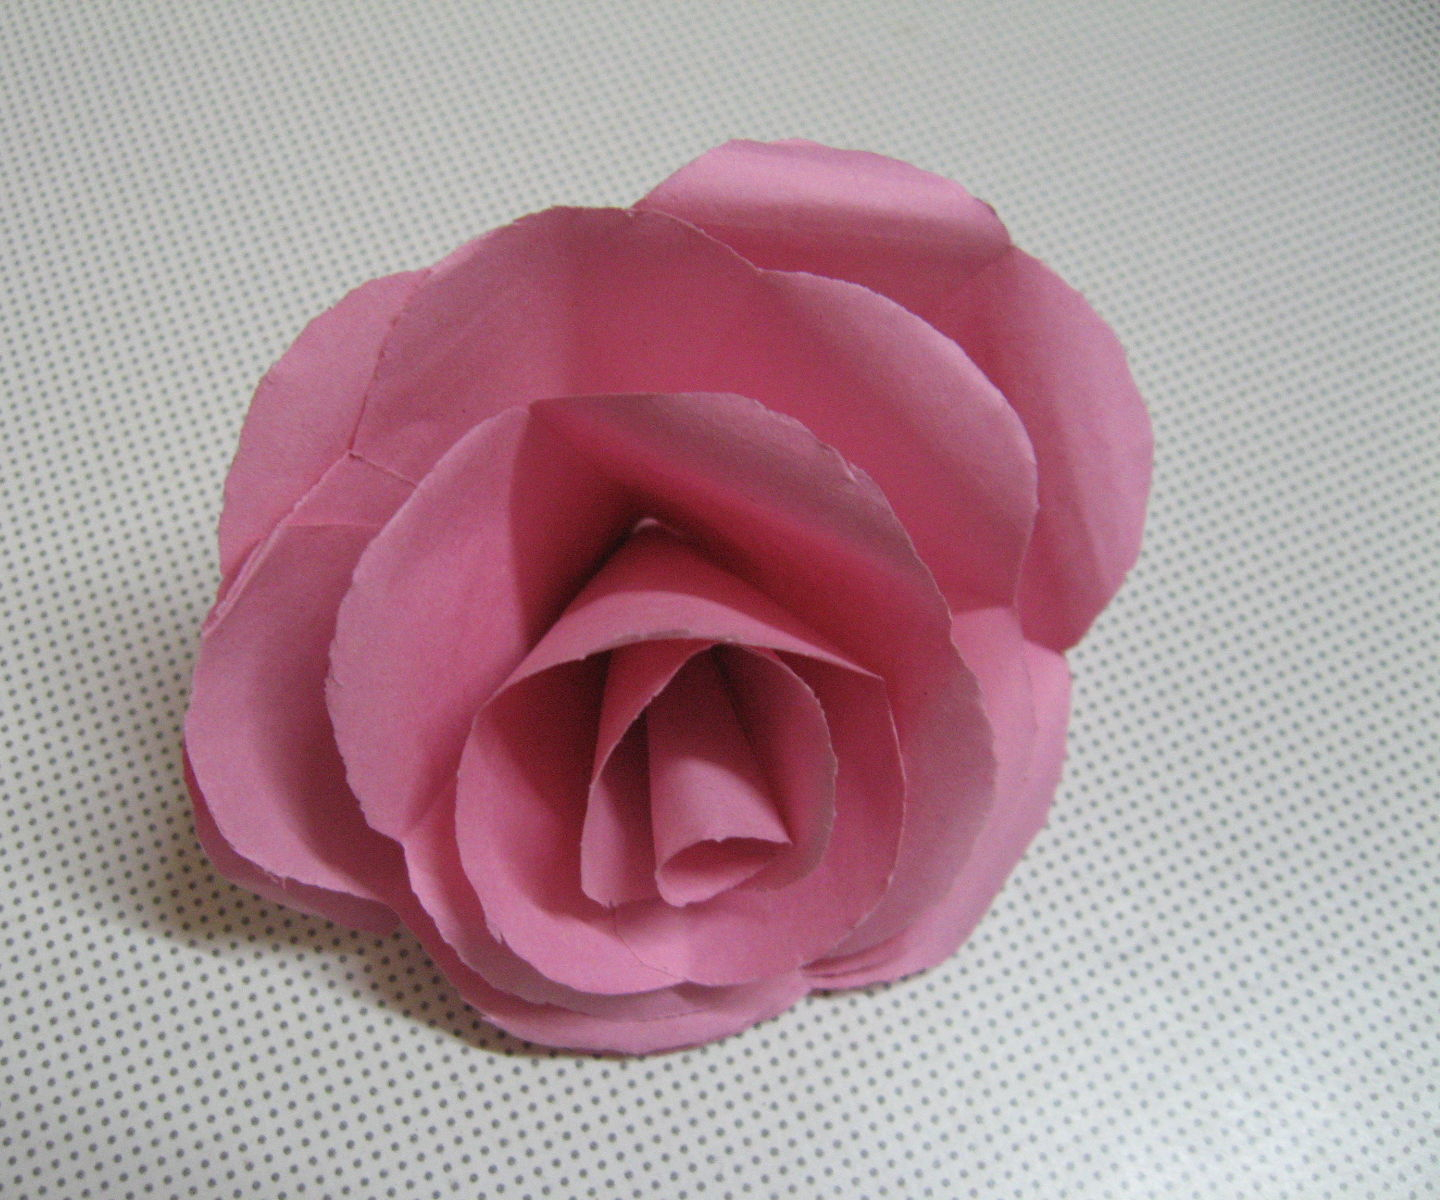 Origami Flower Rose How To Make Real Looking Paper Roses 7 Steps With Pictures